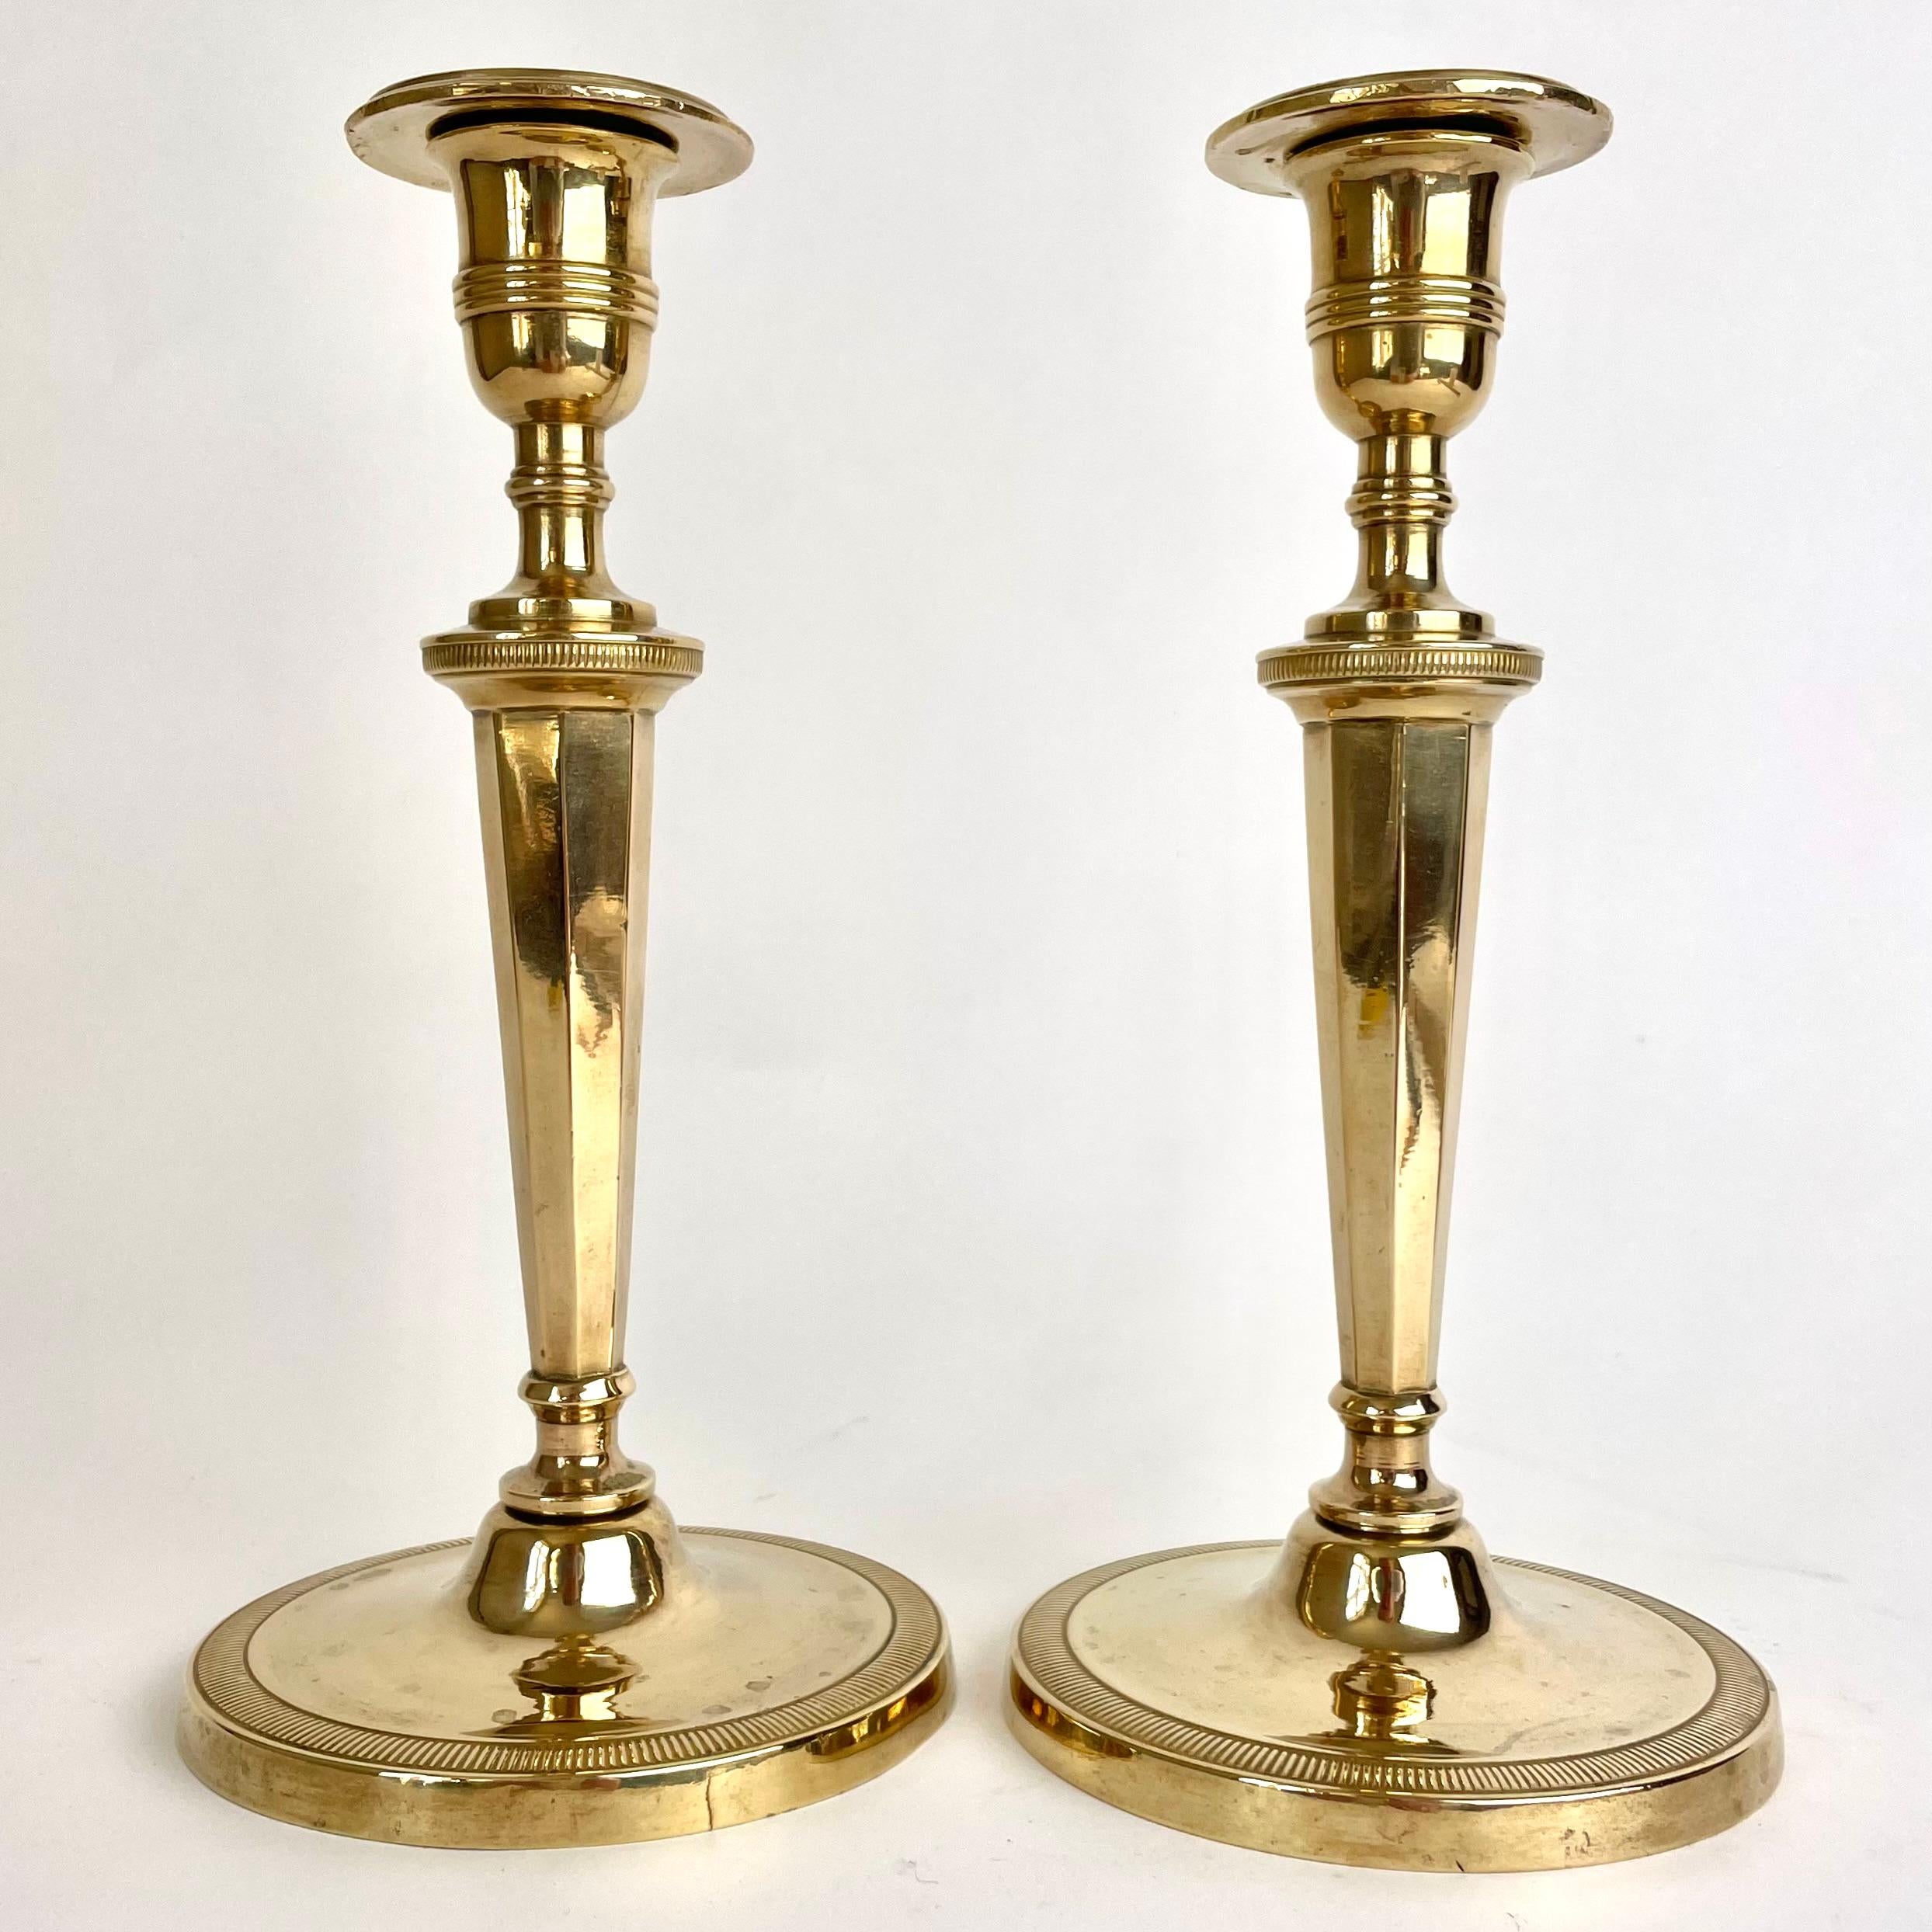 A pair of sophisticated and elegant gilt bronze Candlesticks, Probably made in Paris, France. Directoire circa 1795.

Wear consistent with age and use.